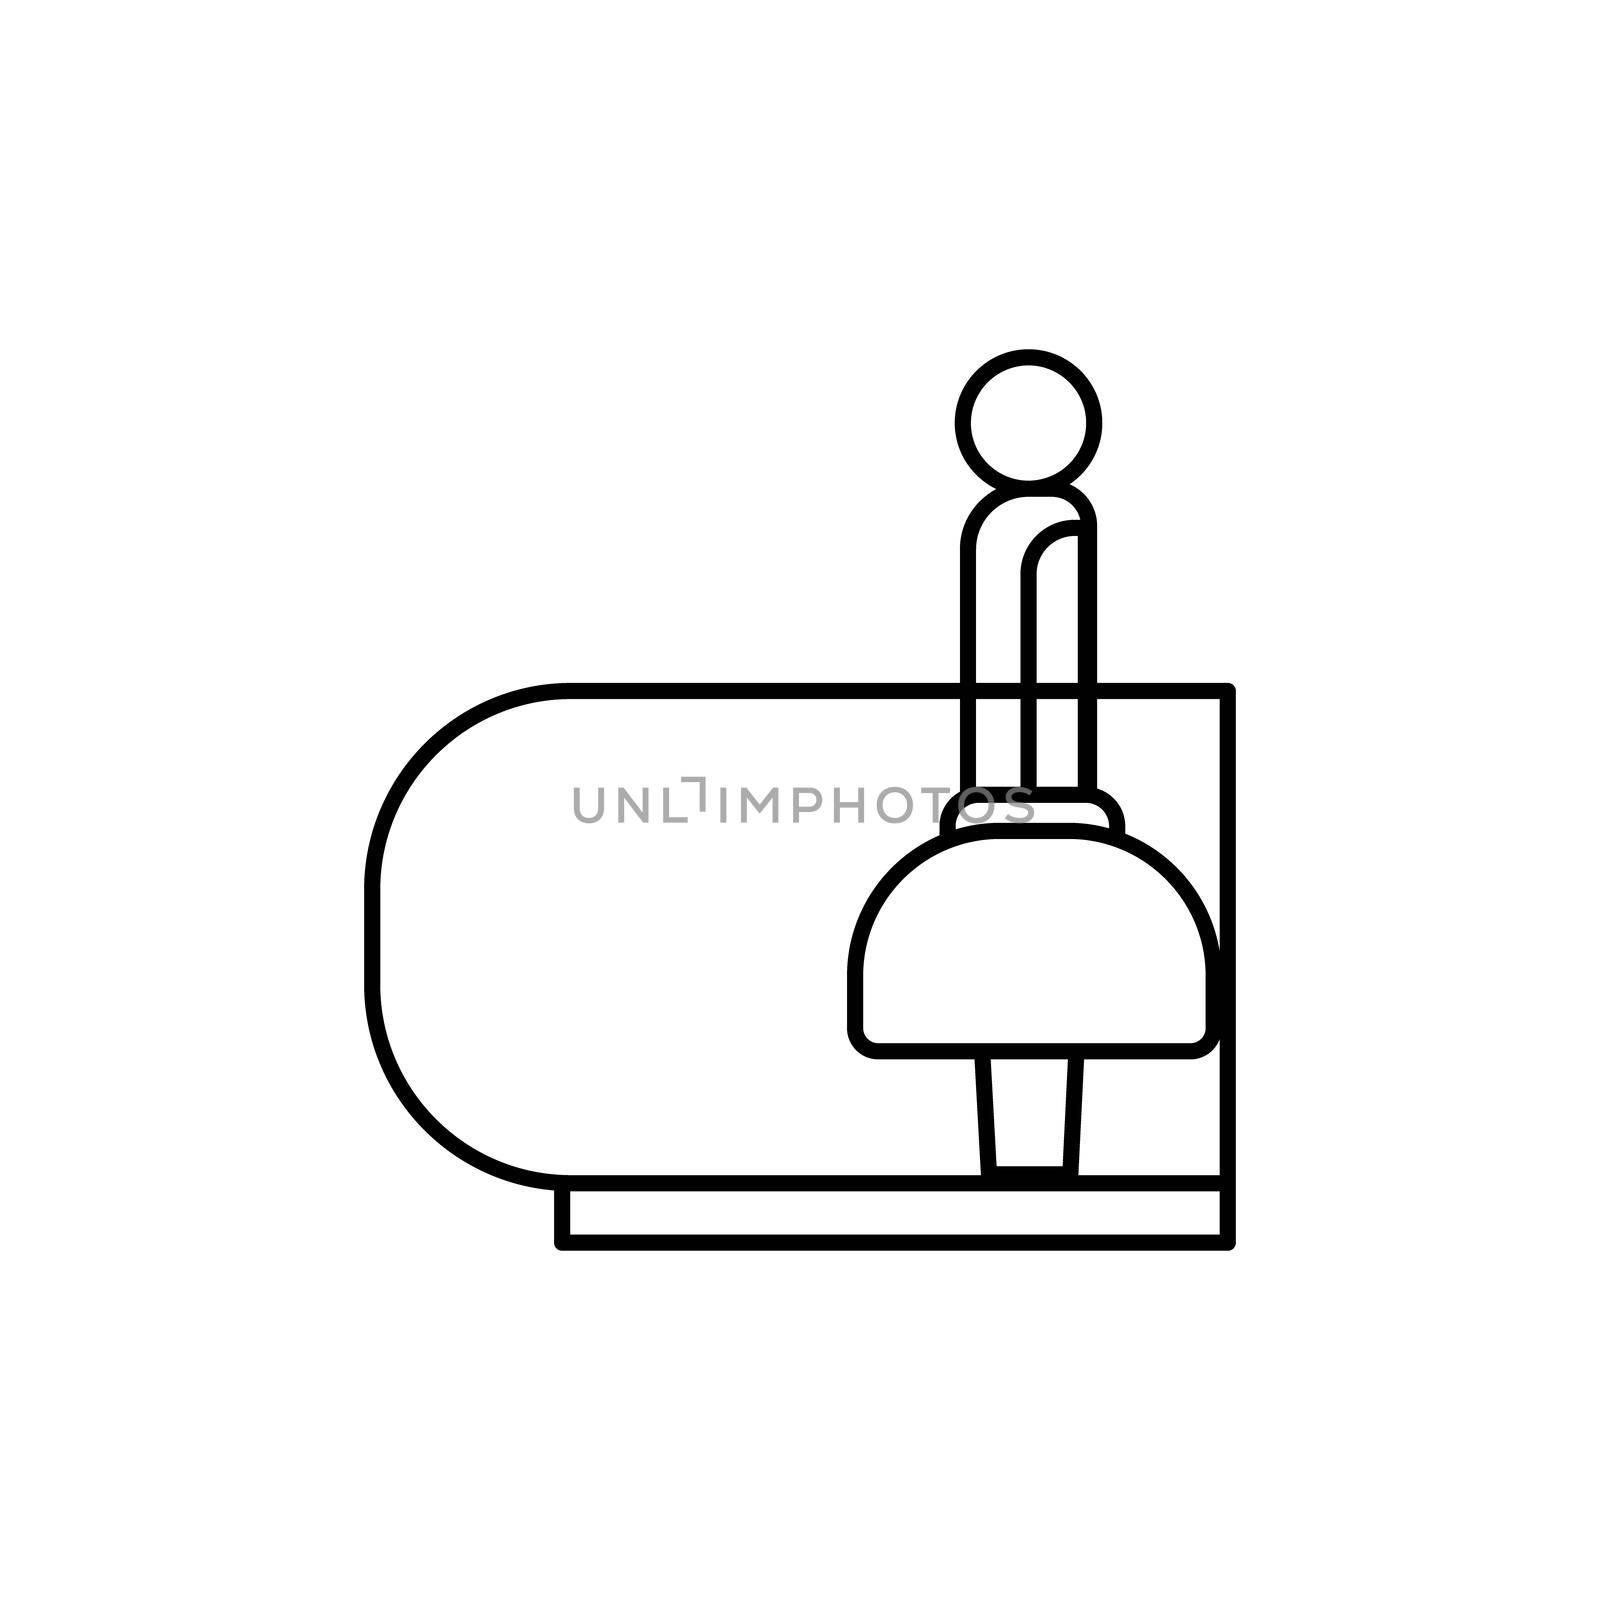 passenger, walkway, transportation line icon. elements of airport, travel illustration icons. signs, symbols can be used for web, logo, mobile app, UI, UX on white background